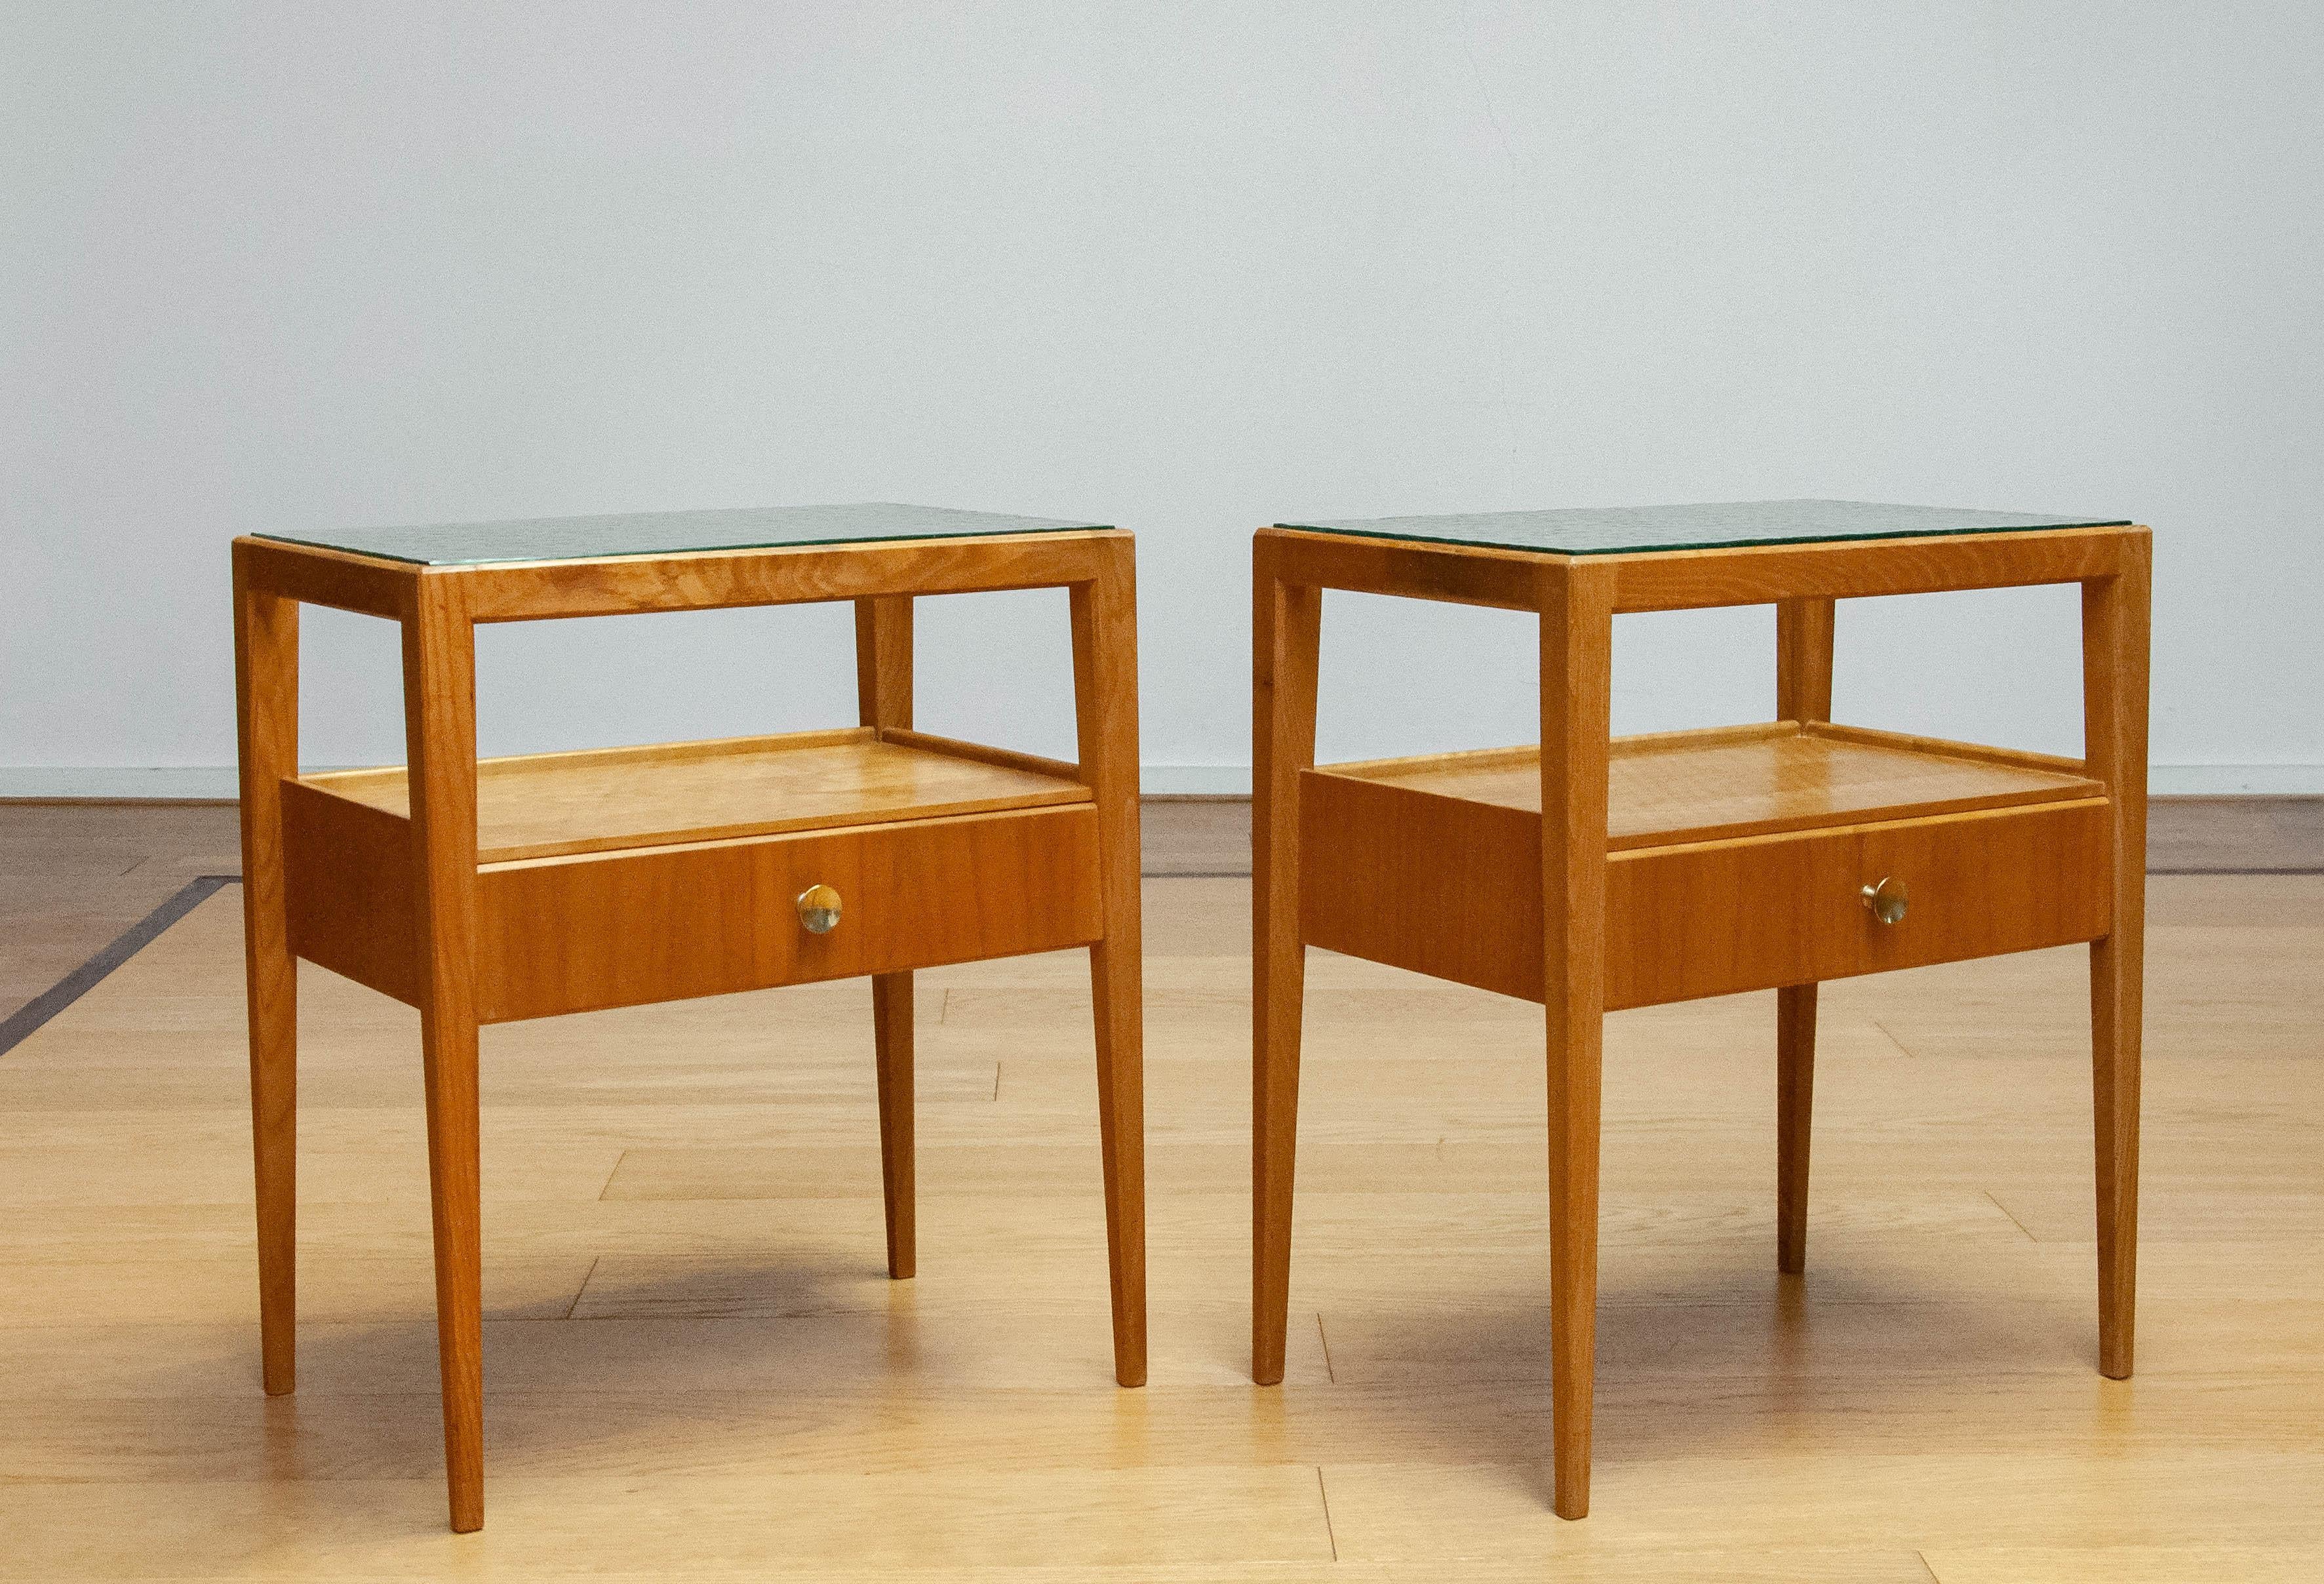 1950s Pair Bedside Tables In Elm With Glass Top By Carl-Axel Acking For Bodafors For Sale 5